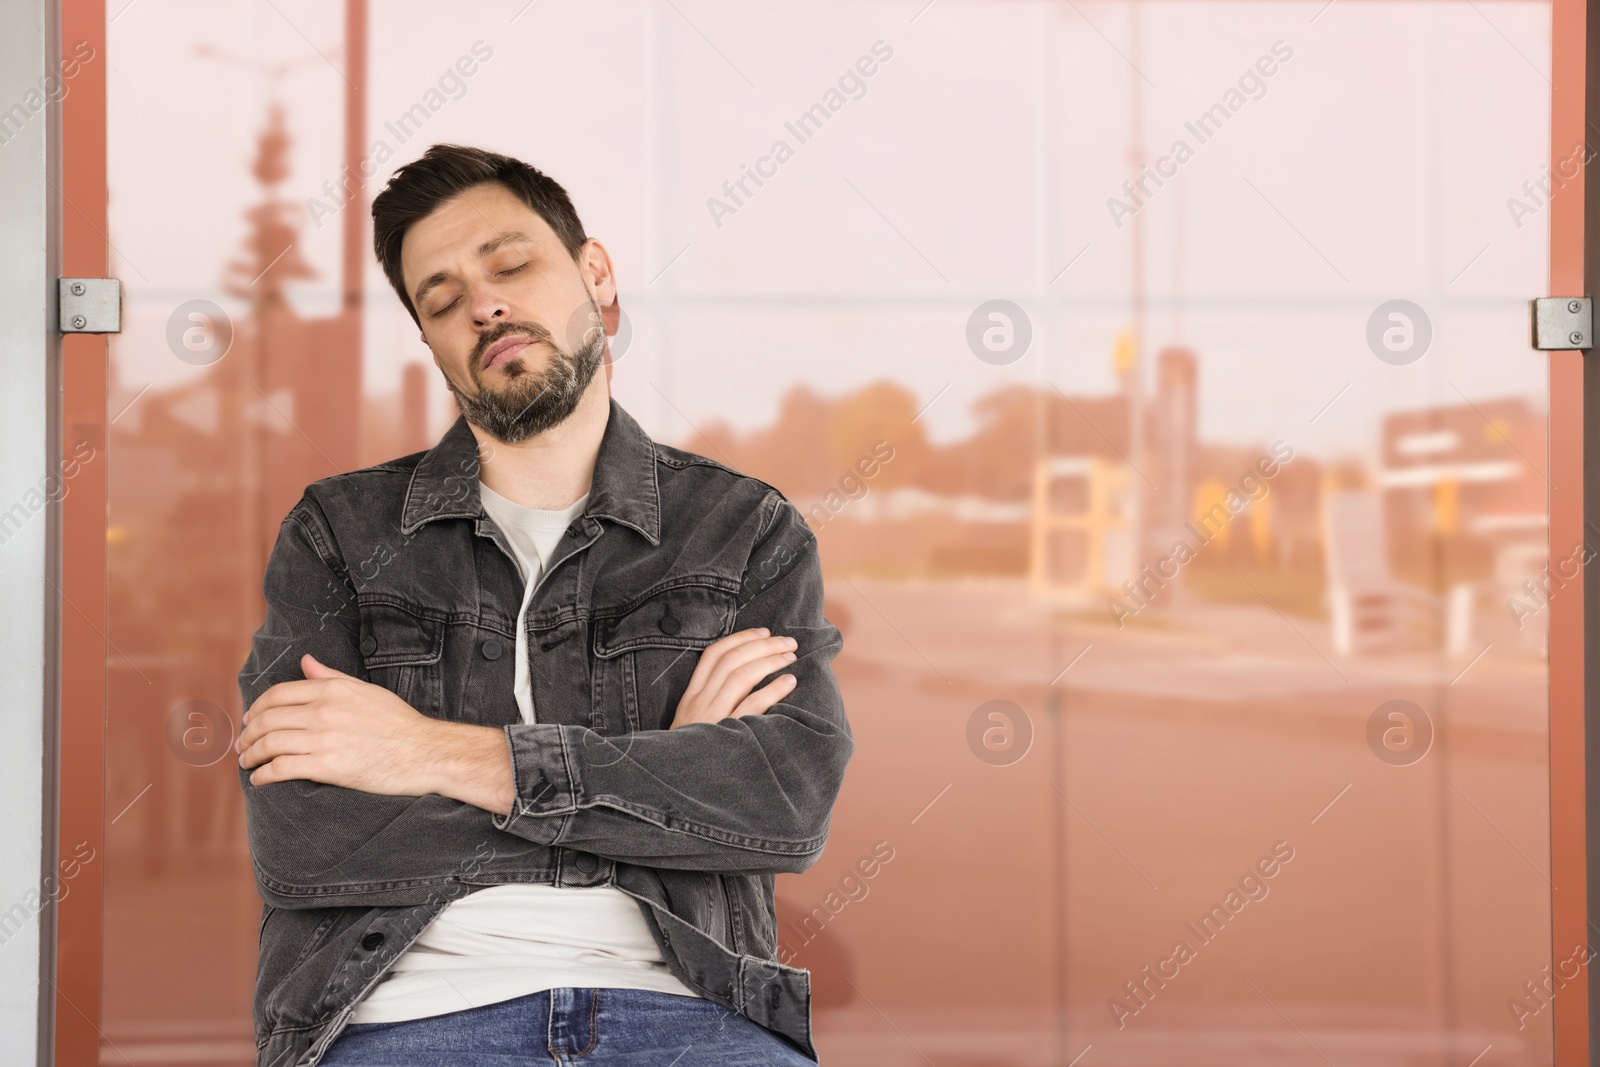 Photo of Tired man sleeping at public transport stop outdoors. Space for text